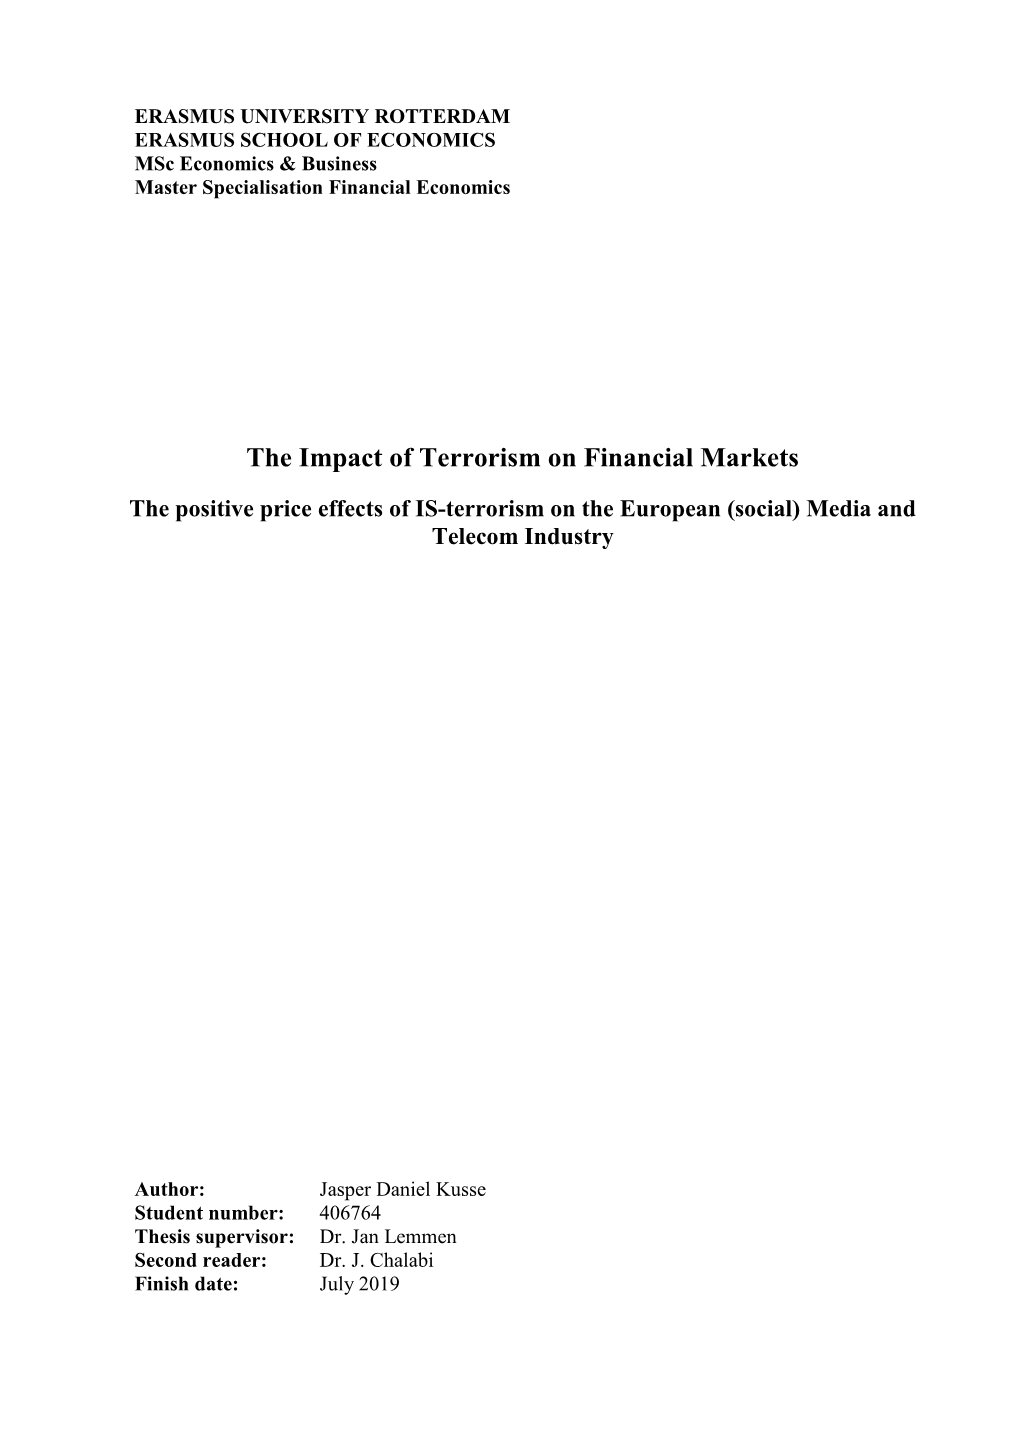 The Impact of Terrorism on Financial Markets